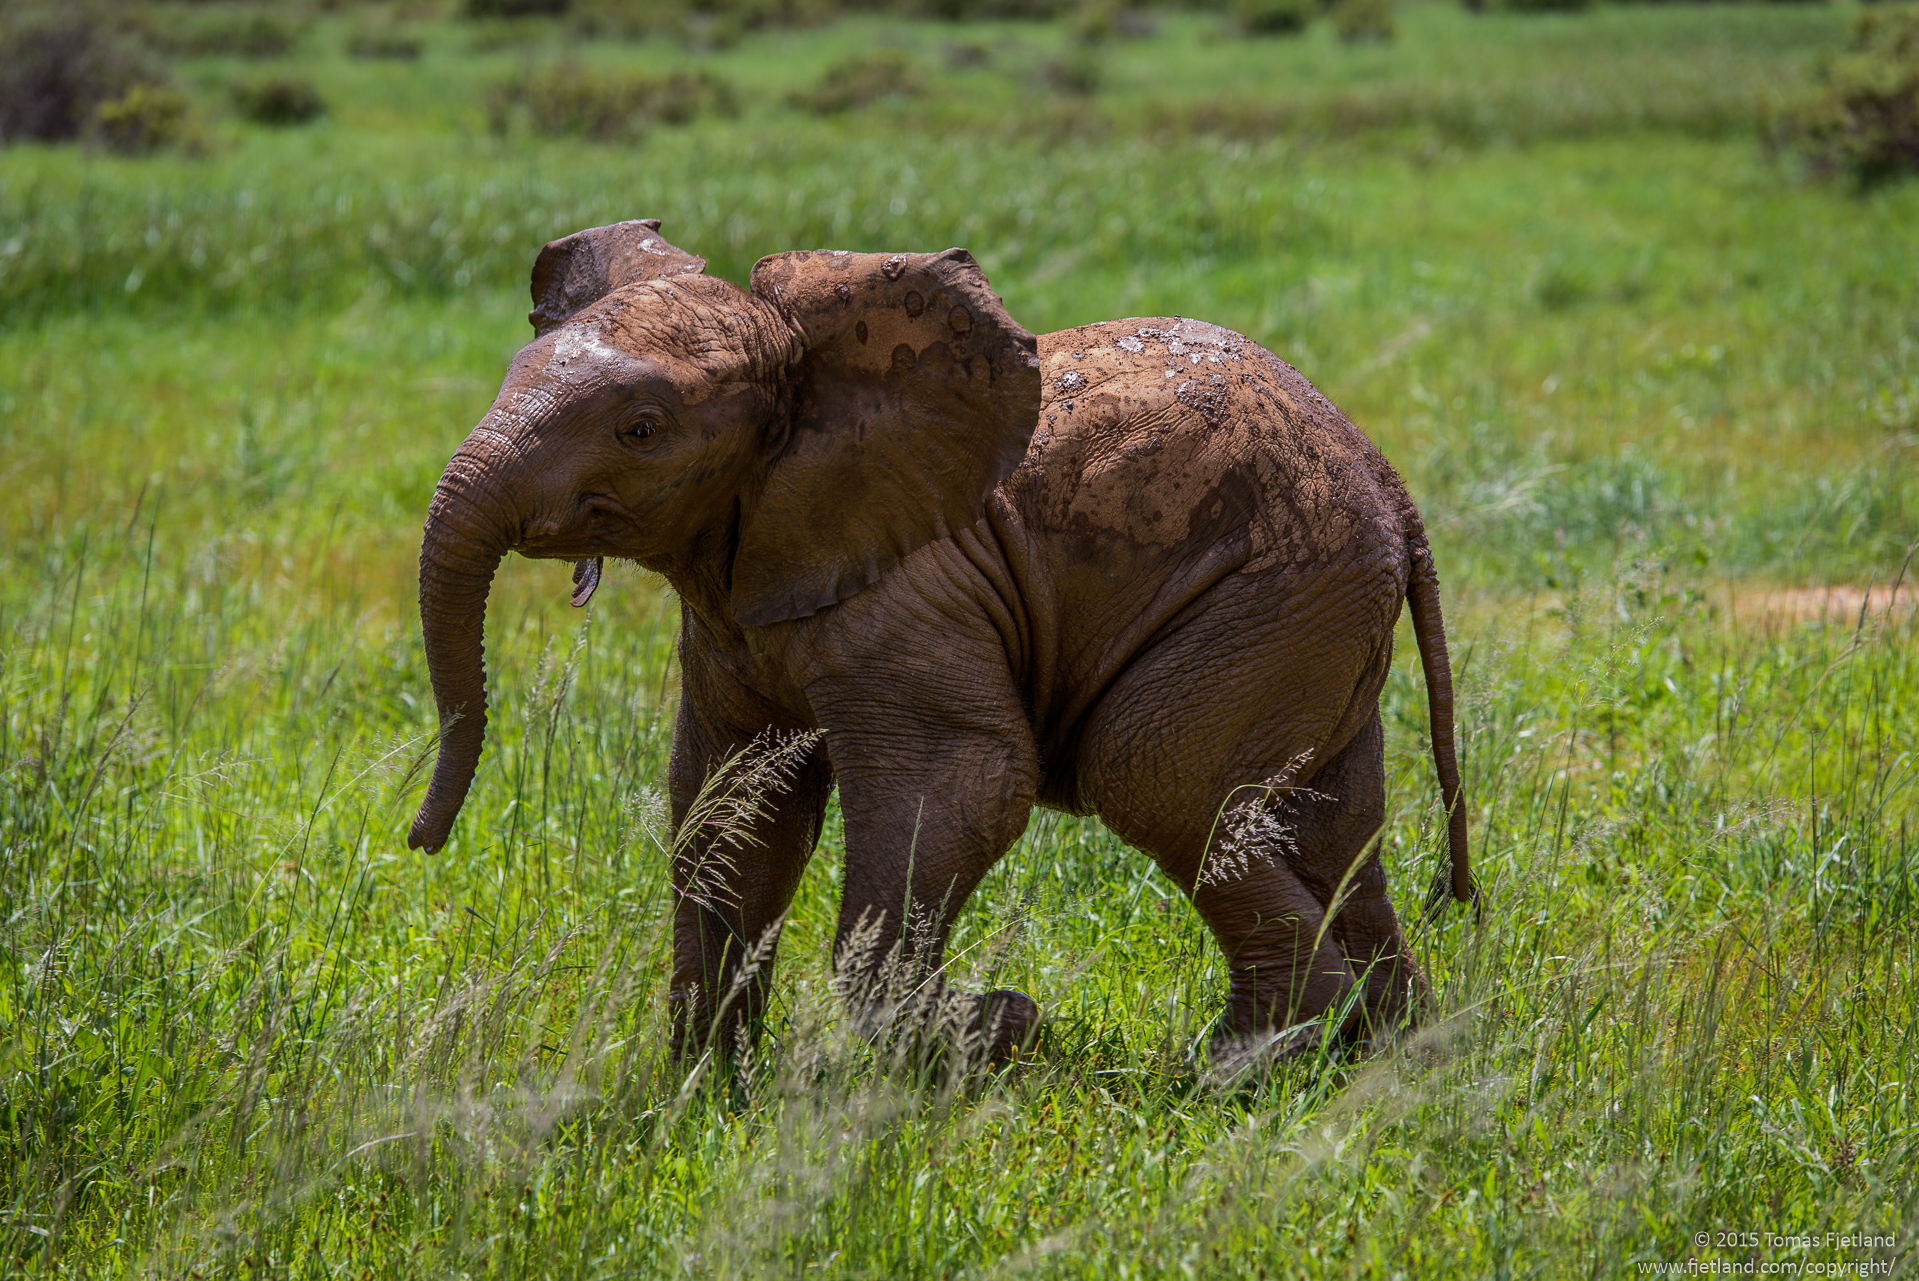 Young elephant running